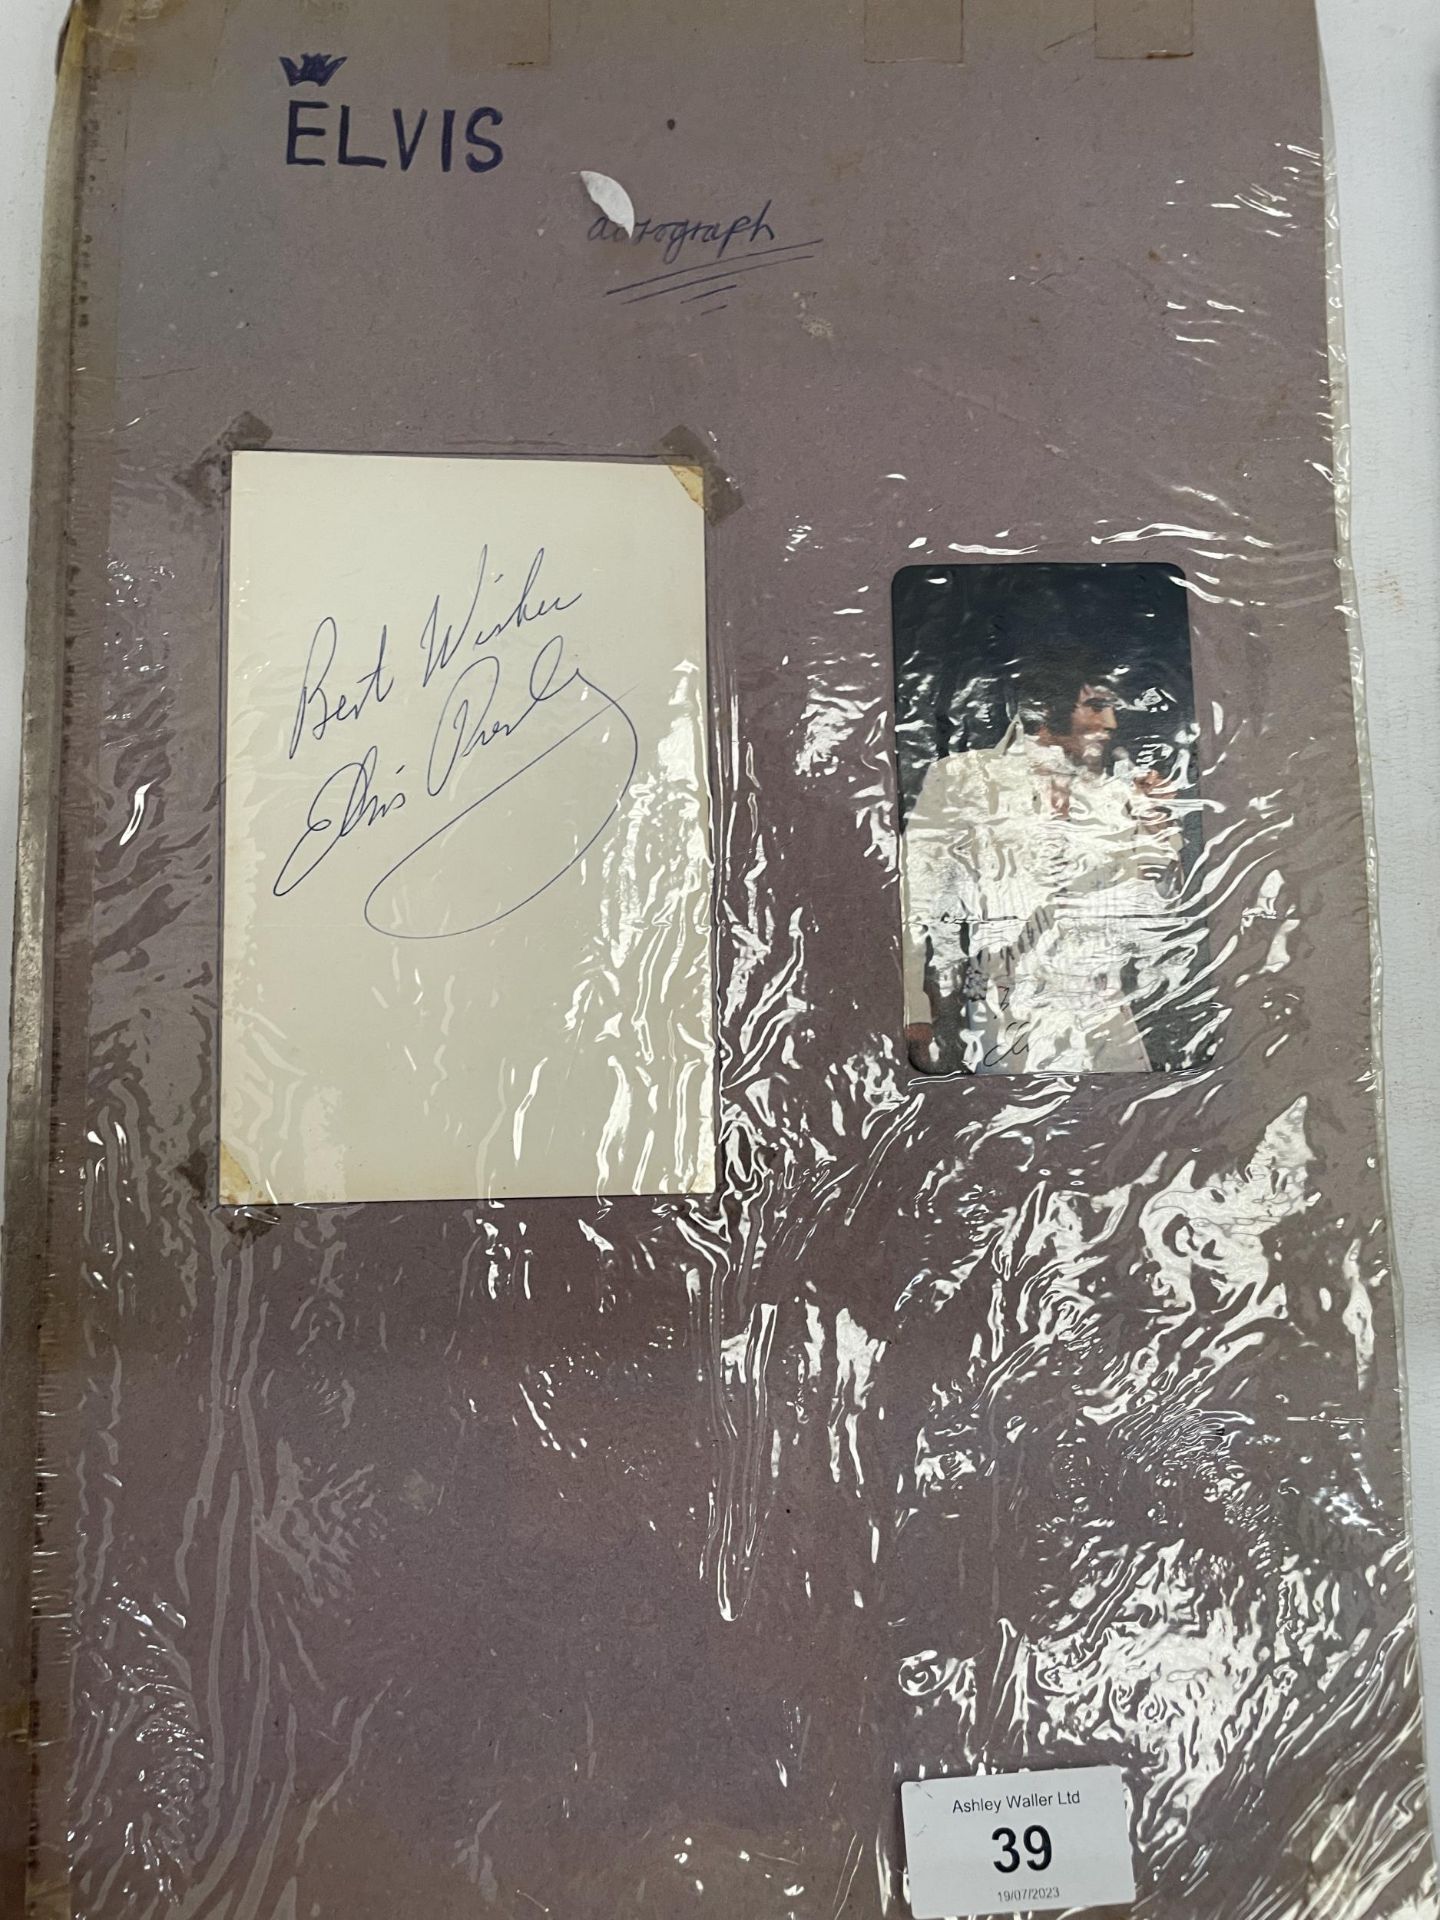 A 1970'S ELVIS PRESLEY AUTOGRAPH FROM AN ELVIS PRESLEY SCRAP BOOK - BELIEVED AUTHENTIC BUT NO - Image 5 of 5